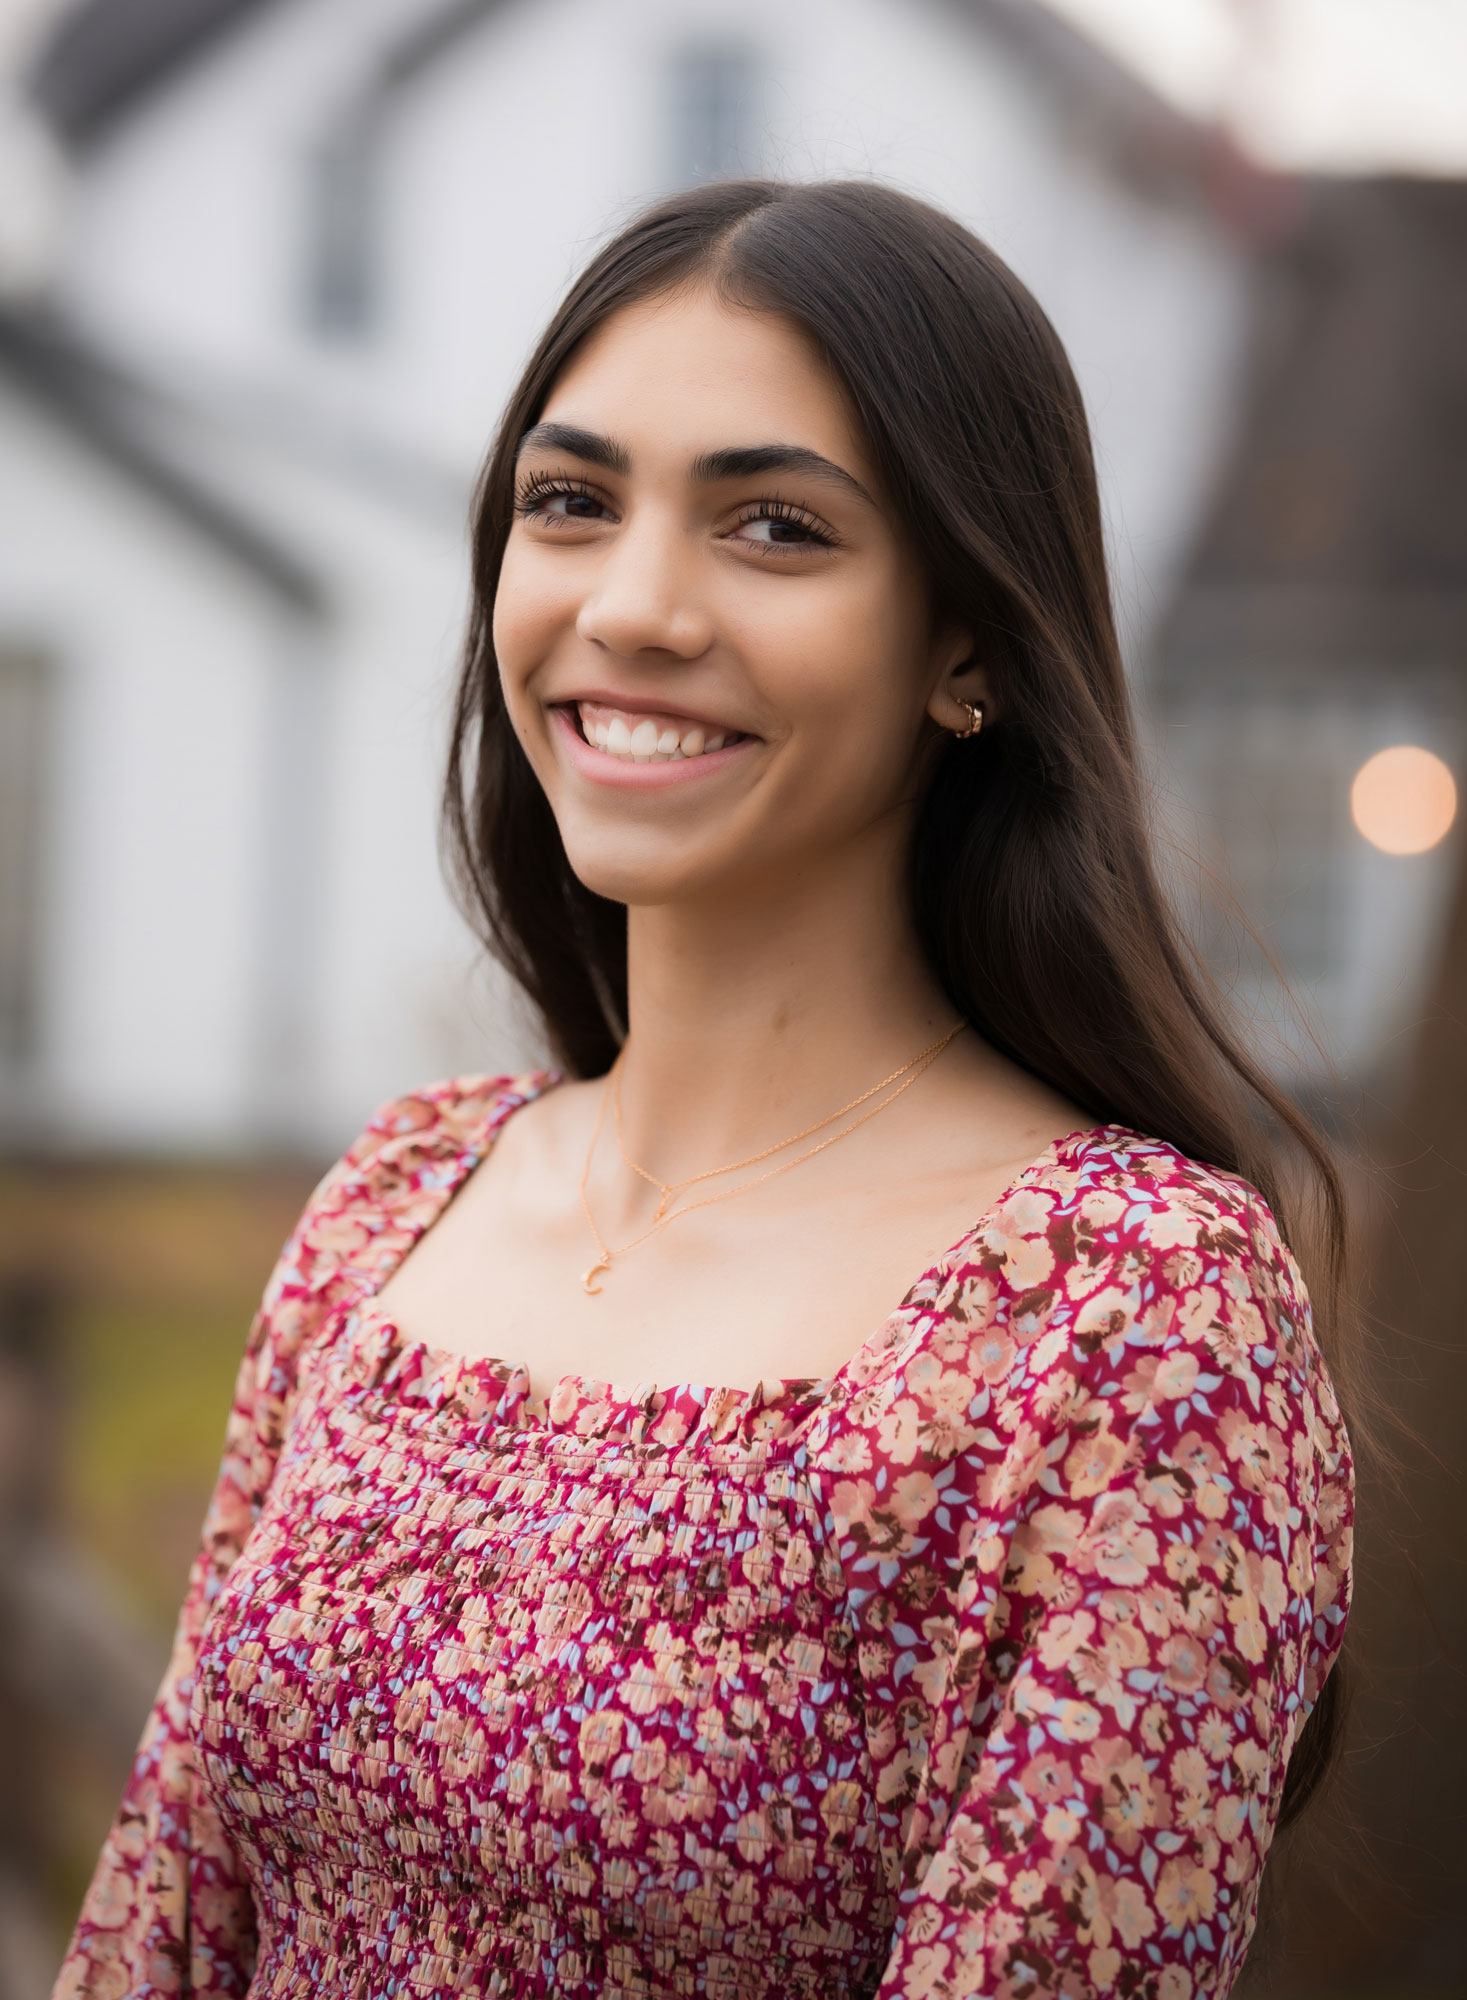 senior girl with floral top smiling